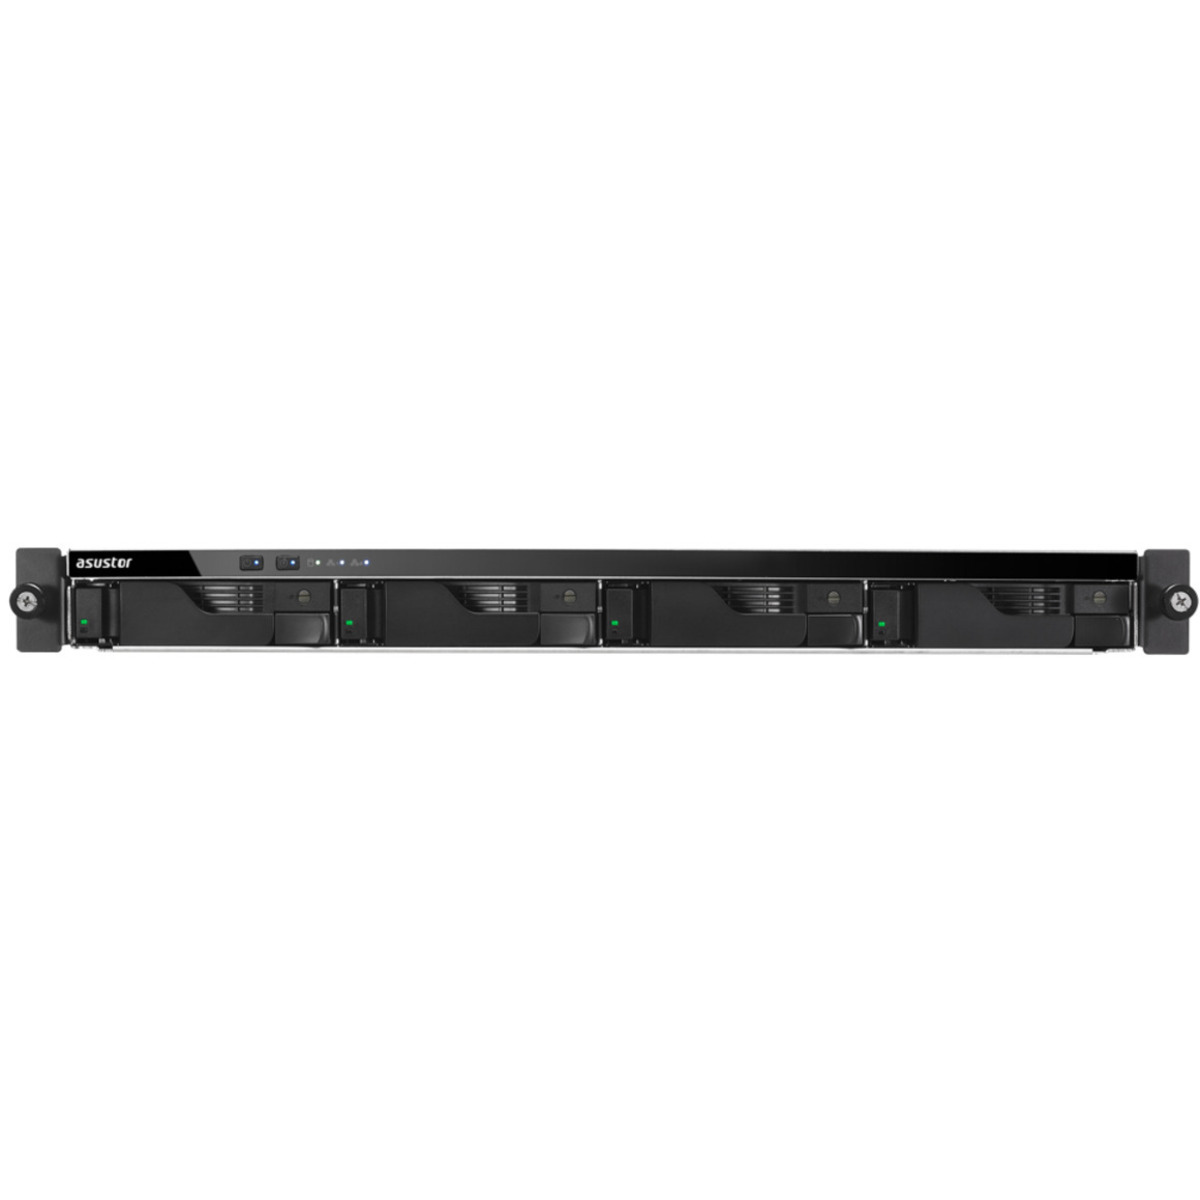 ASUSTOR LOCKERSTOR 4RS AS6504RS 48tb 4-Bay RackMount Multimedia / Power User / Business NAS - Network Attached Storage Device 4x12tb Western Digital Ultrastar DC HC520 HUH721212ALE600 3.5 7200rpm SATA 6Gb/s HDD ENTERPRISE Class Drives Installed - Burn-In Tested - FREE RAM UPGRADE LOCKERSTOR 4RS AS6504RS